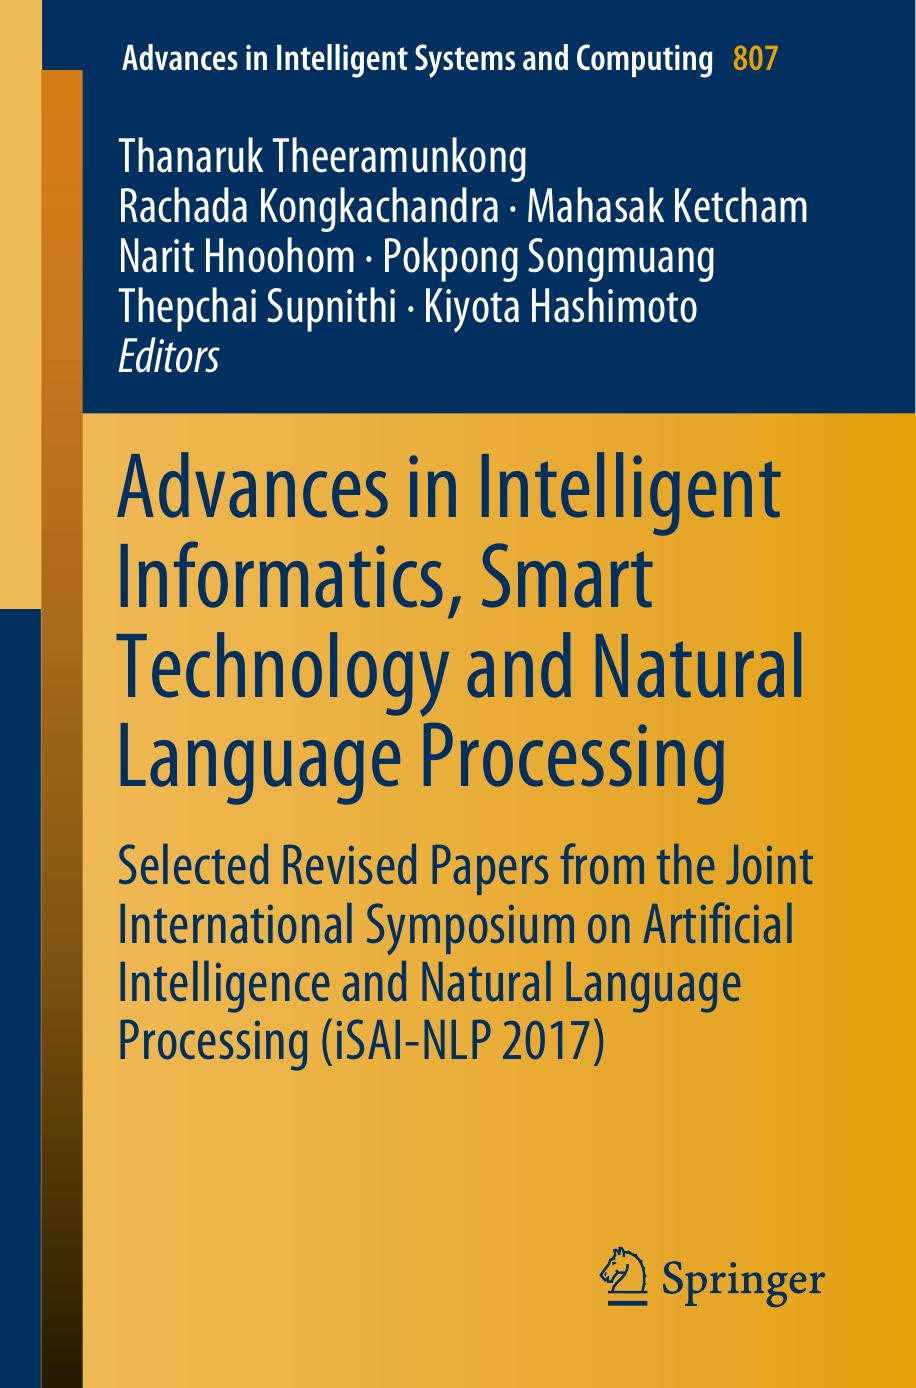 Advances in Intelligent Informatics, Smart Technology and Natural Language Processing: Selected Revised Papers From the Joint International Symposium on Artificial Intelligence and Natural Language Processing (iSAI-NLP 2017)